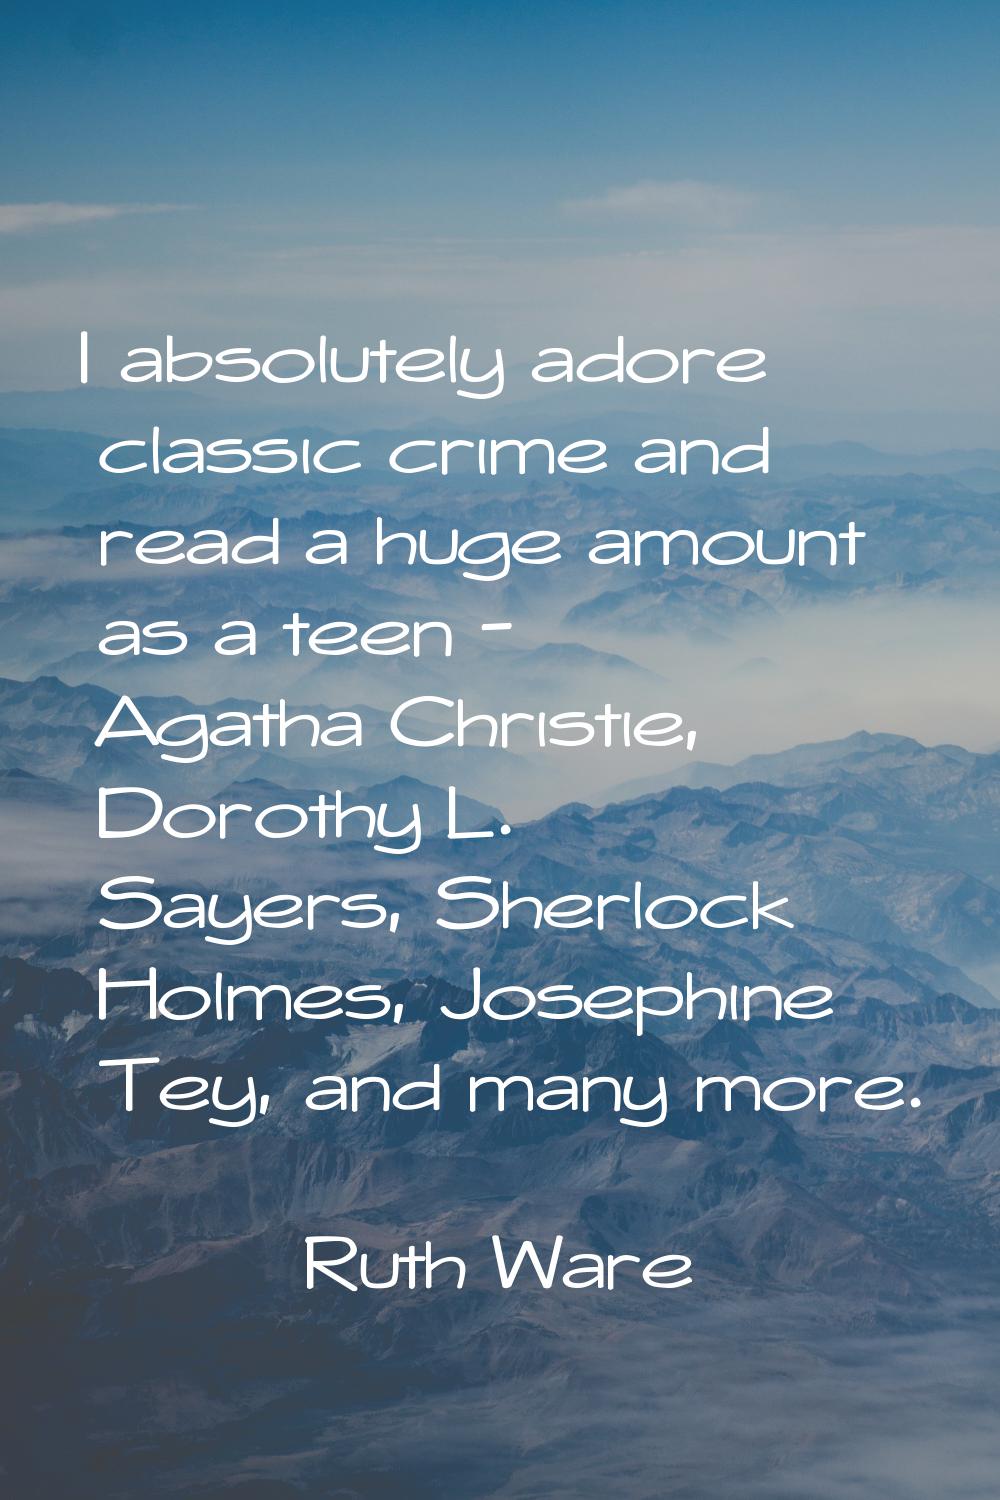 I absolutely adore classic crime and read a huge amount as a teen - Agatha Christie, Dorothy L. Say